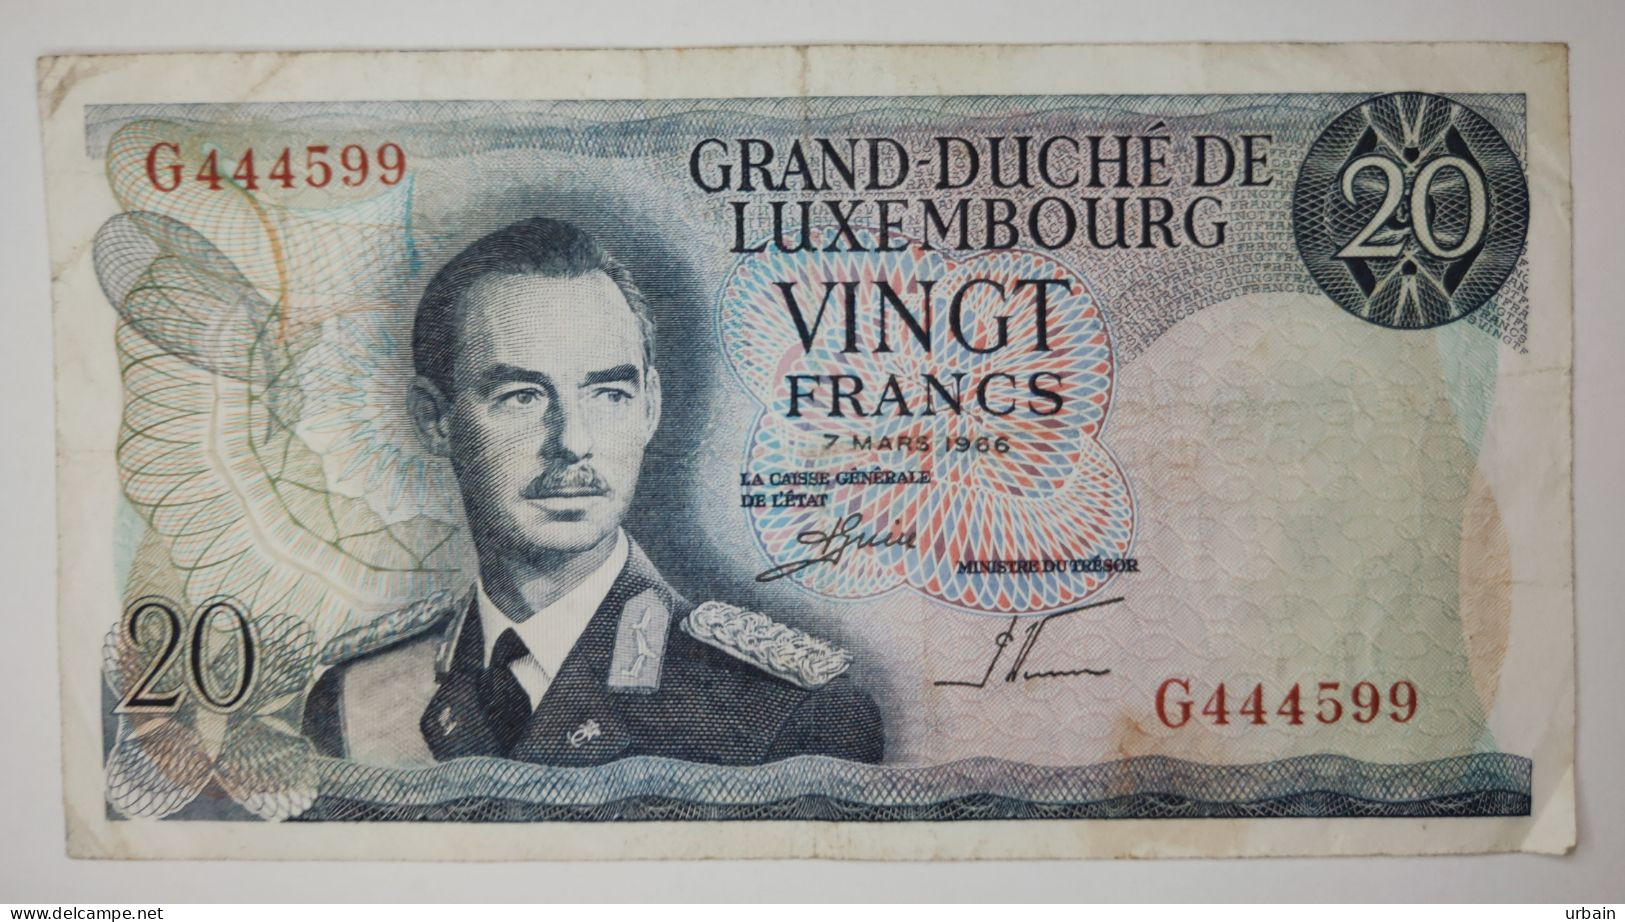 Batch of 5 banknotes - Luxembourg - 20 francs - 7 mars 1966